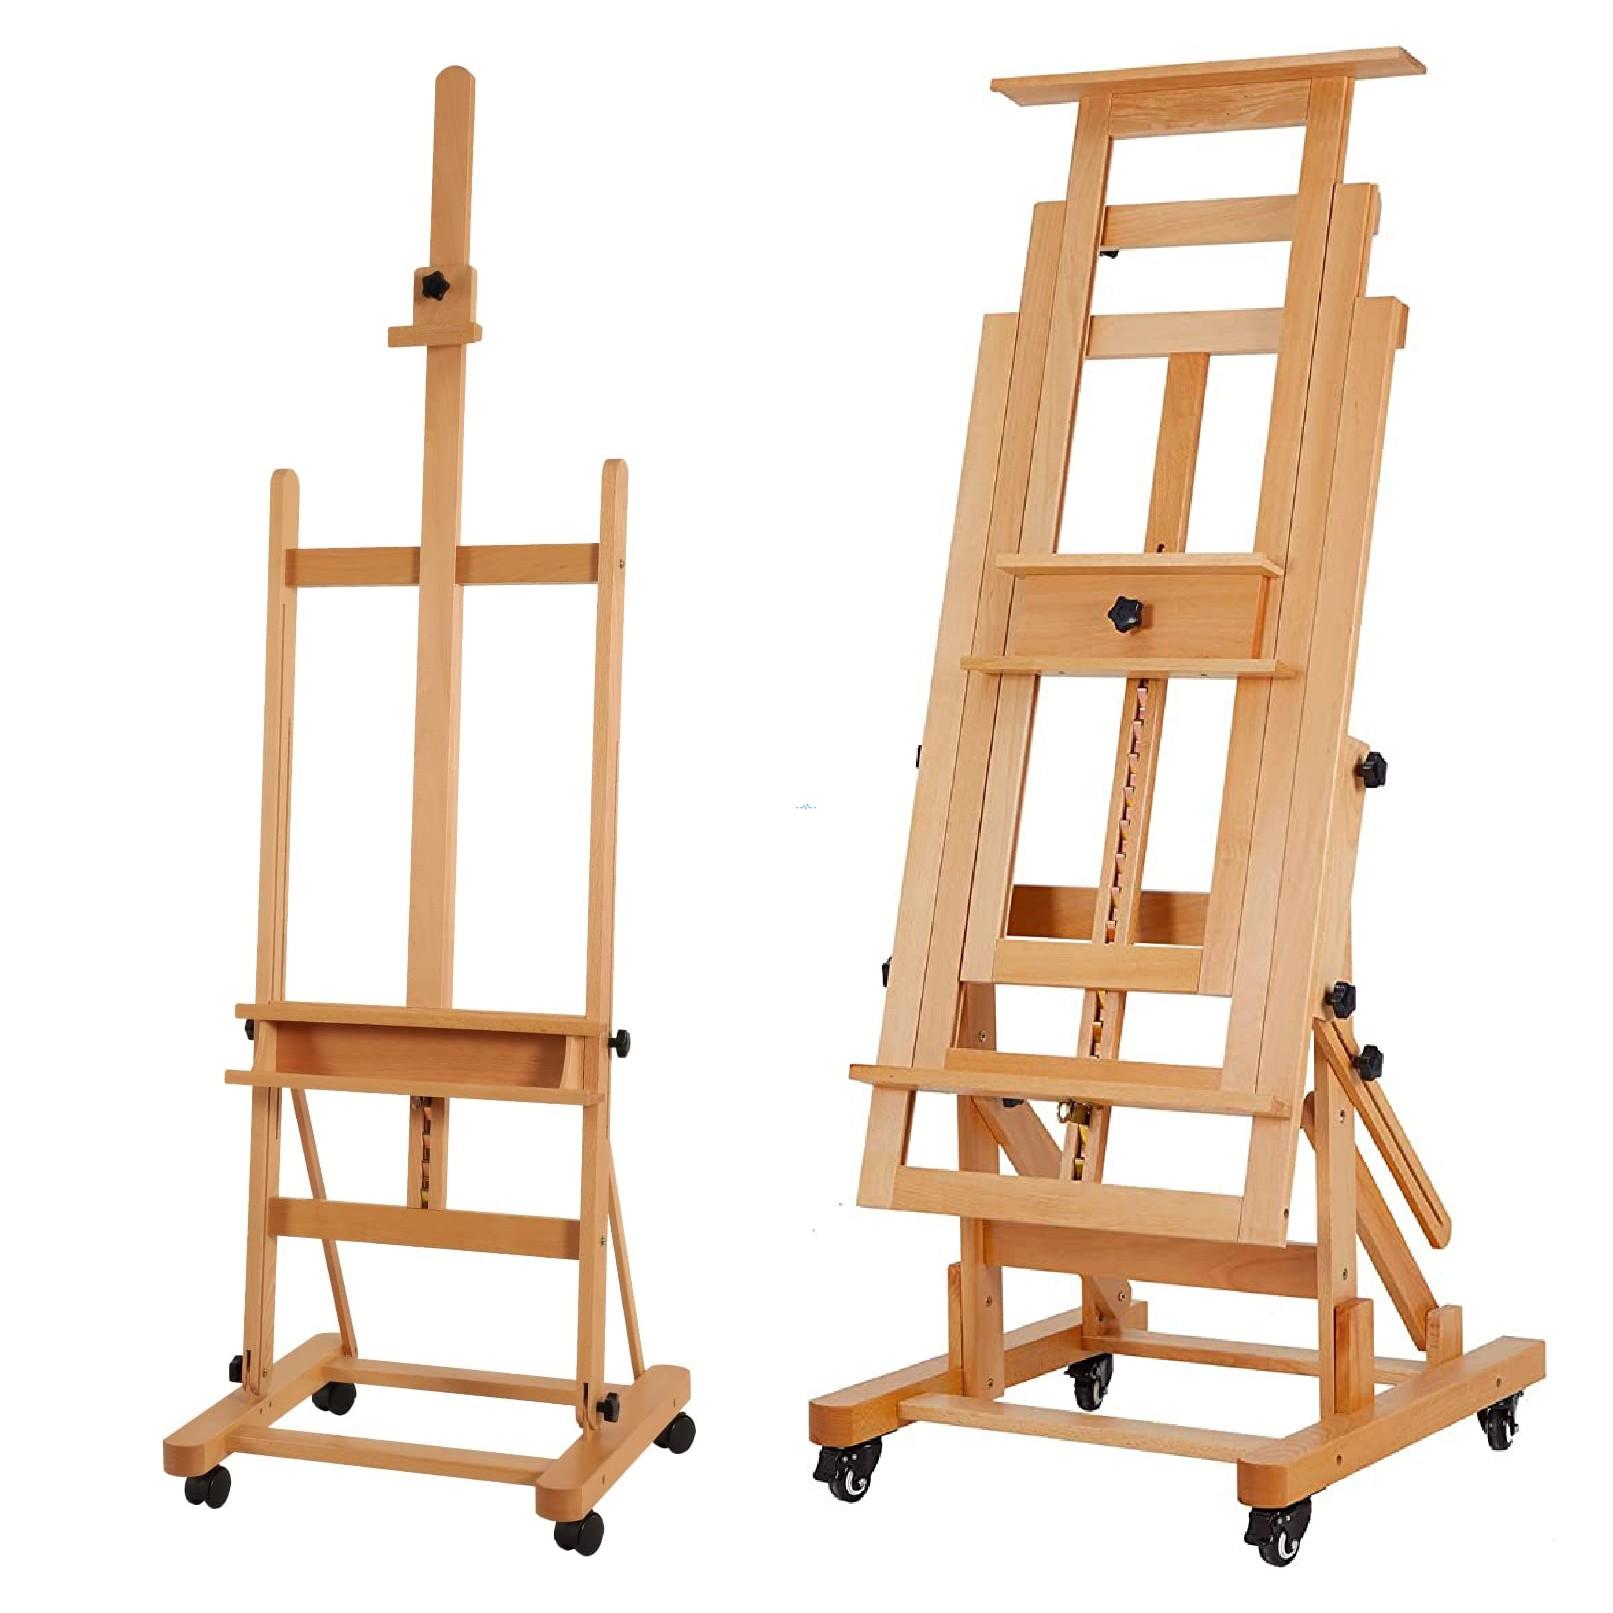 Large Painters Easel Adjustable Solid Beech Wood Artist Easel, Studio Easel for Adults with Brush Holder, Holds Canvas up to 48